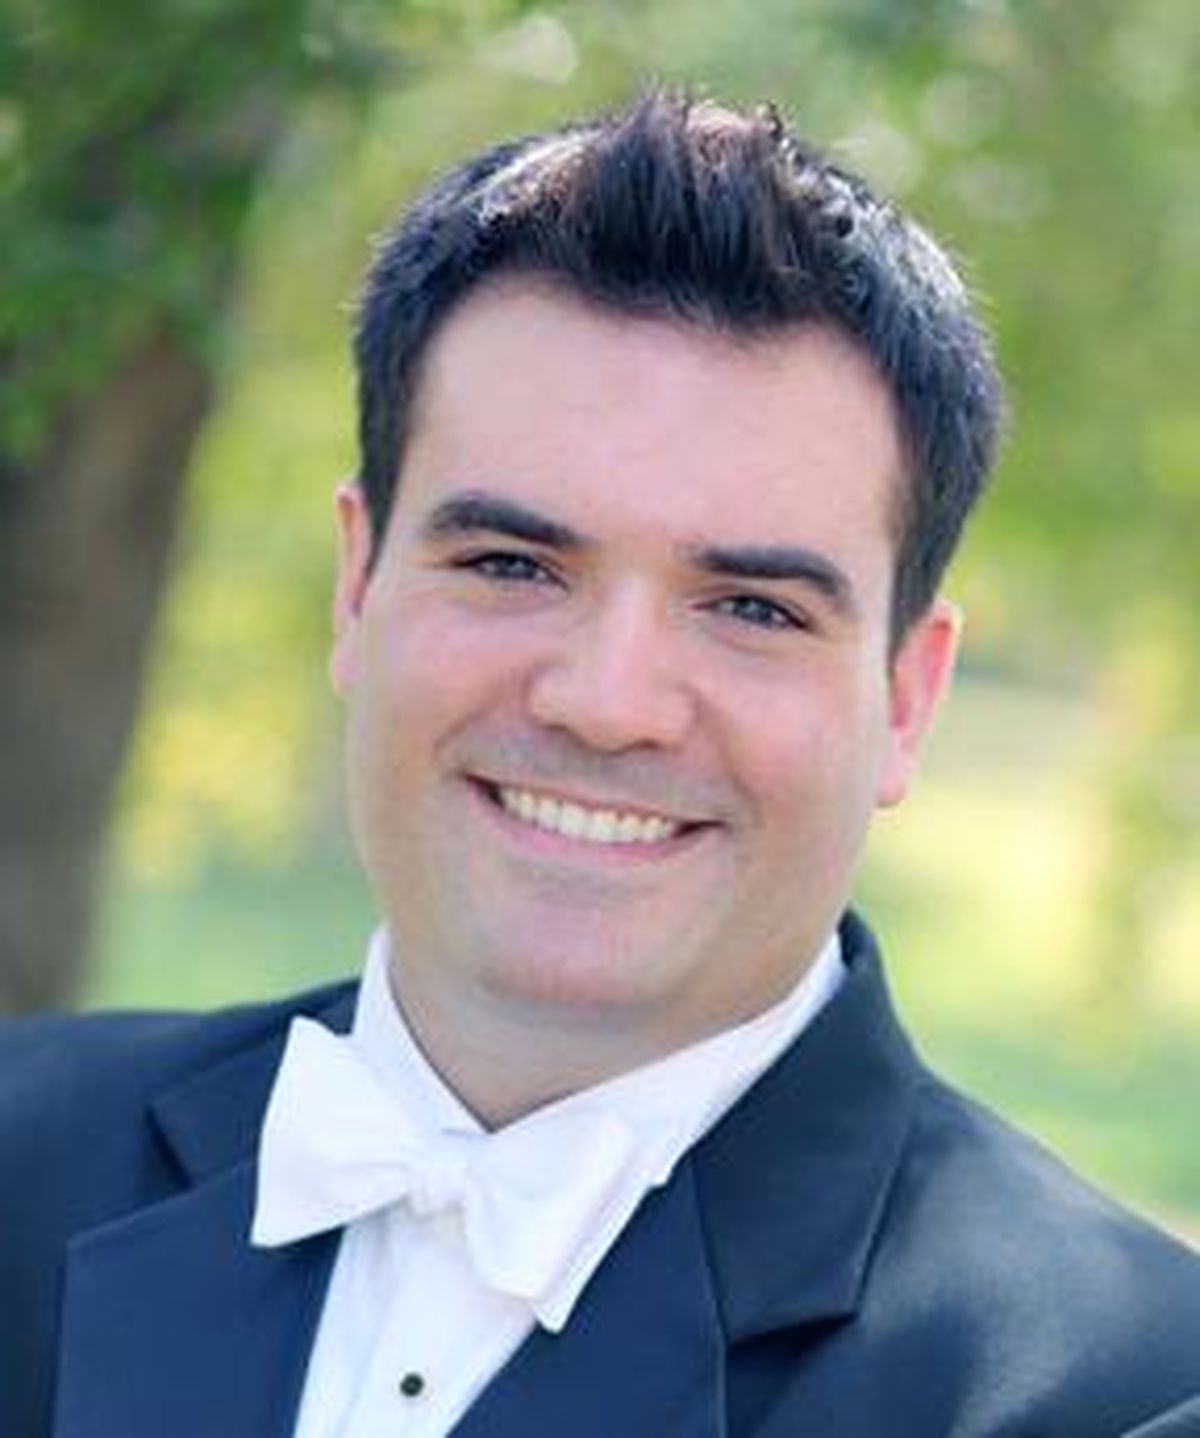 Pierre-Alain Chevalier of Houston will conduct the Coeur d’Alene Symphony on Jan. 19-20.